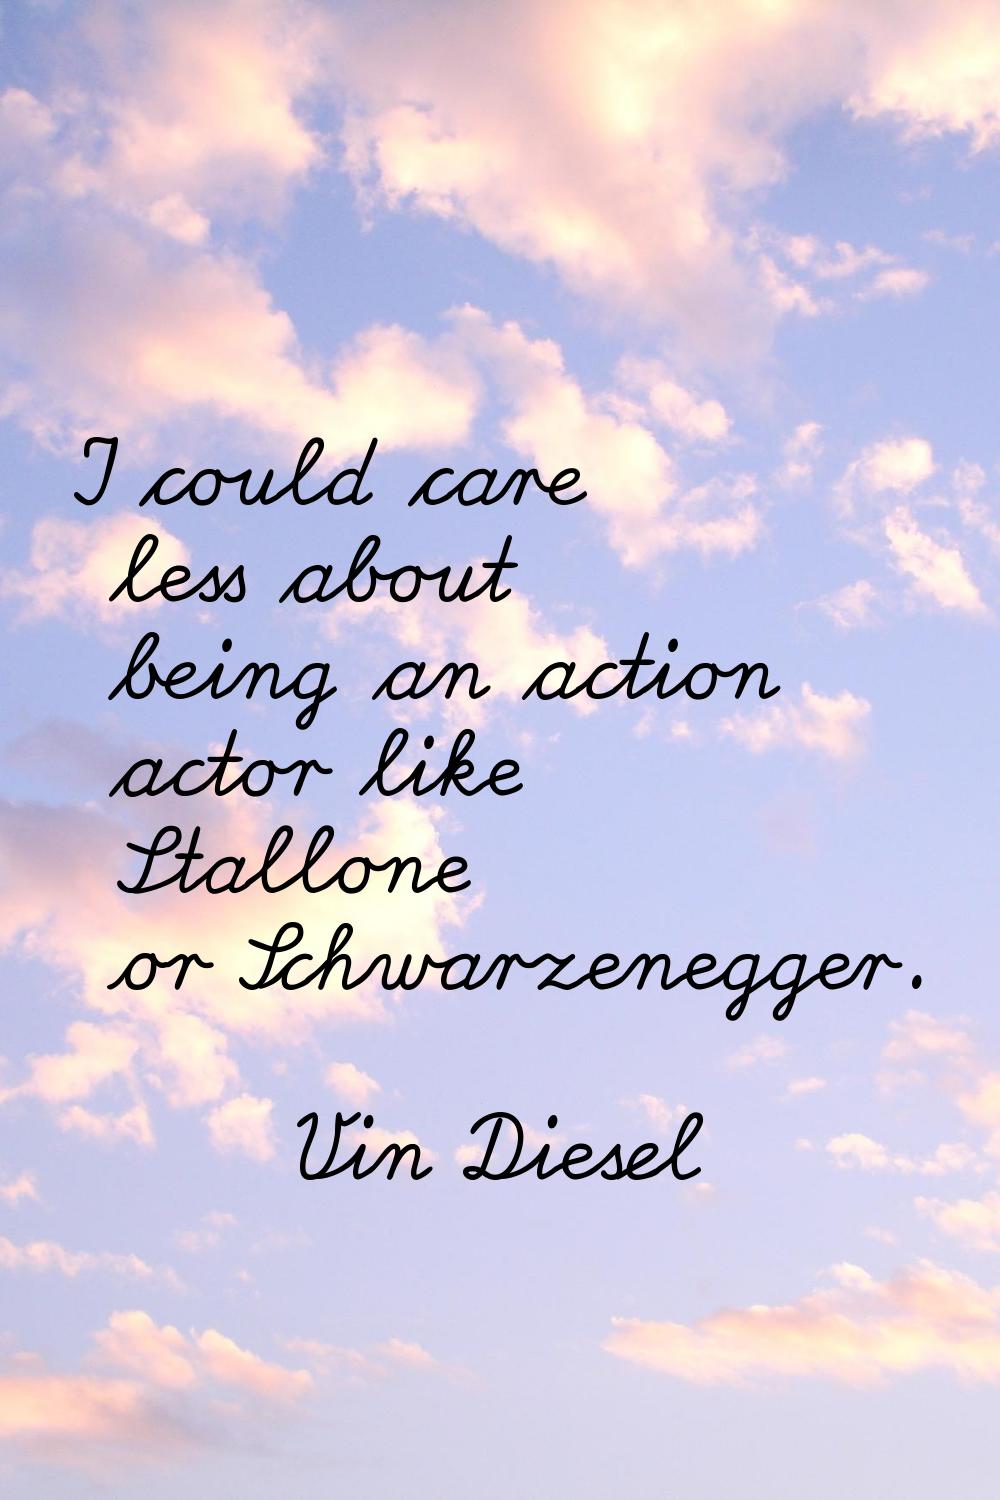 I could care less about being an action actor like Stallone or Schwarzenegger.